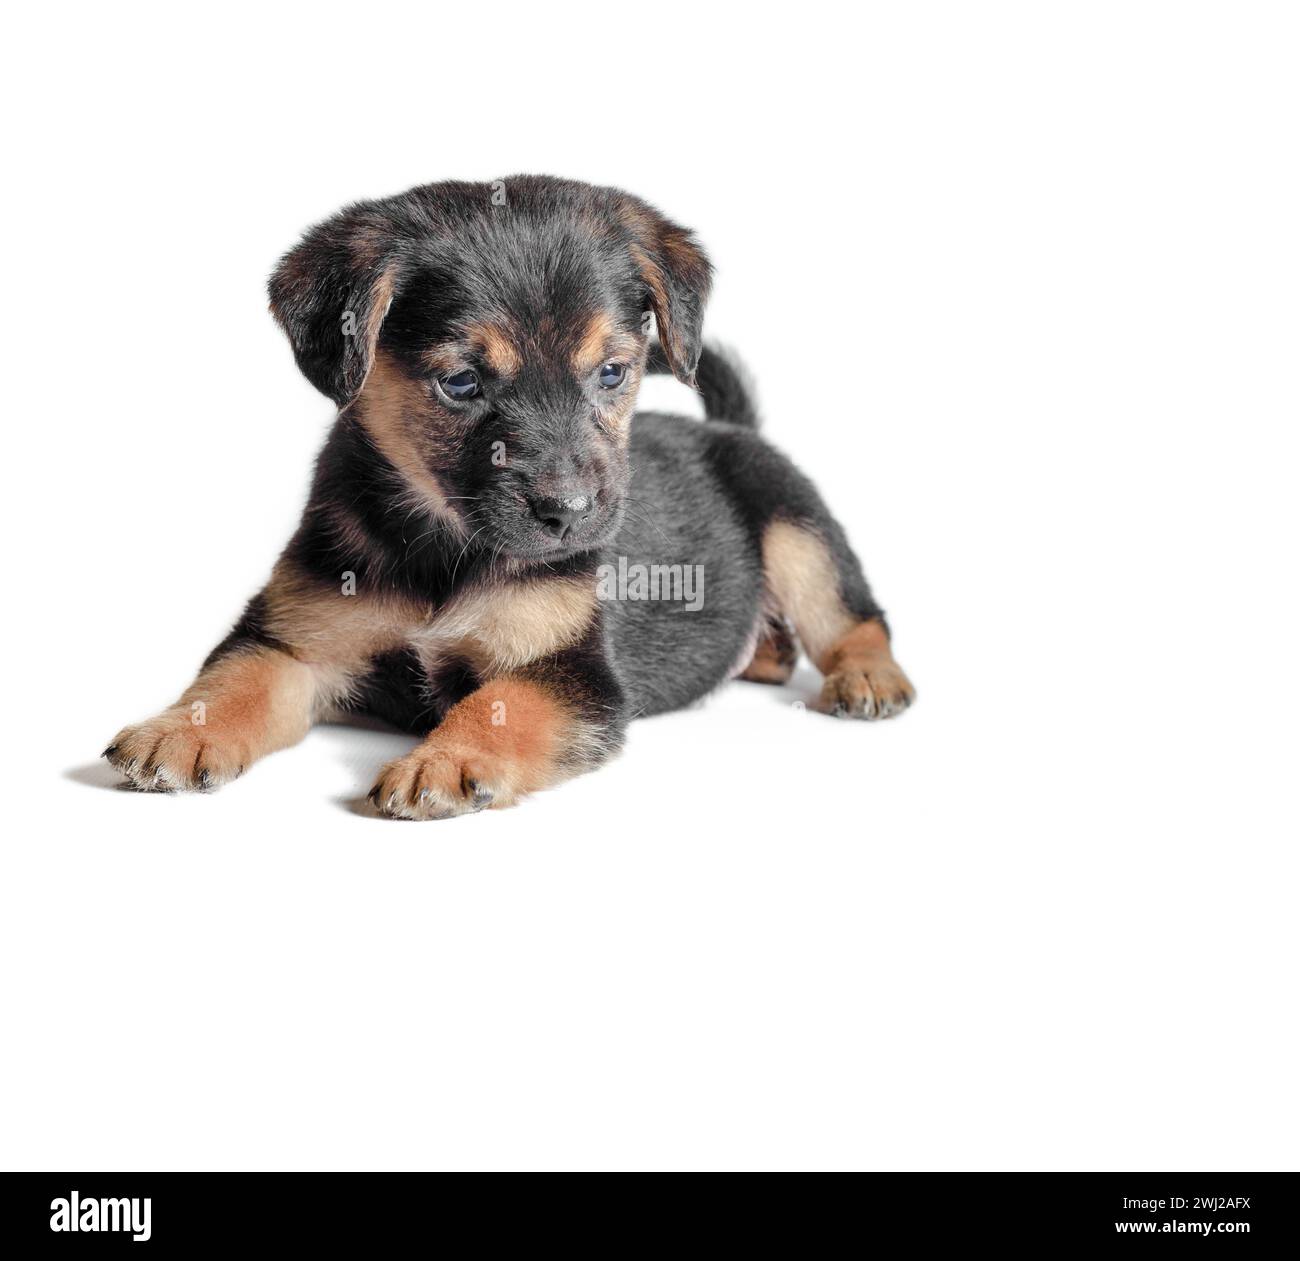 Mongrel black and tan puppy lies on a white background Stock Photo